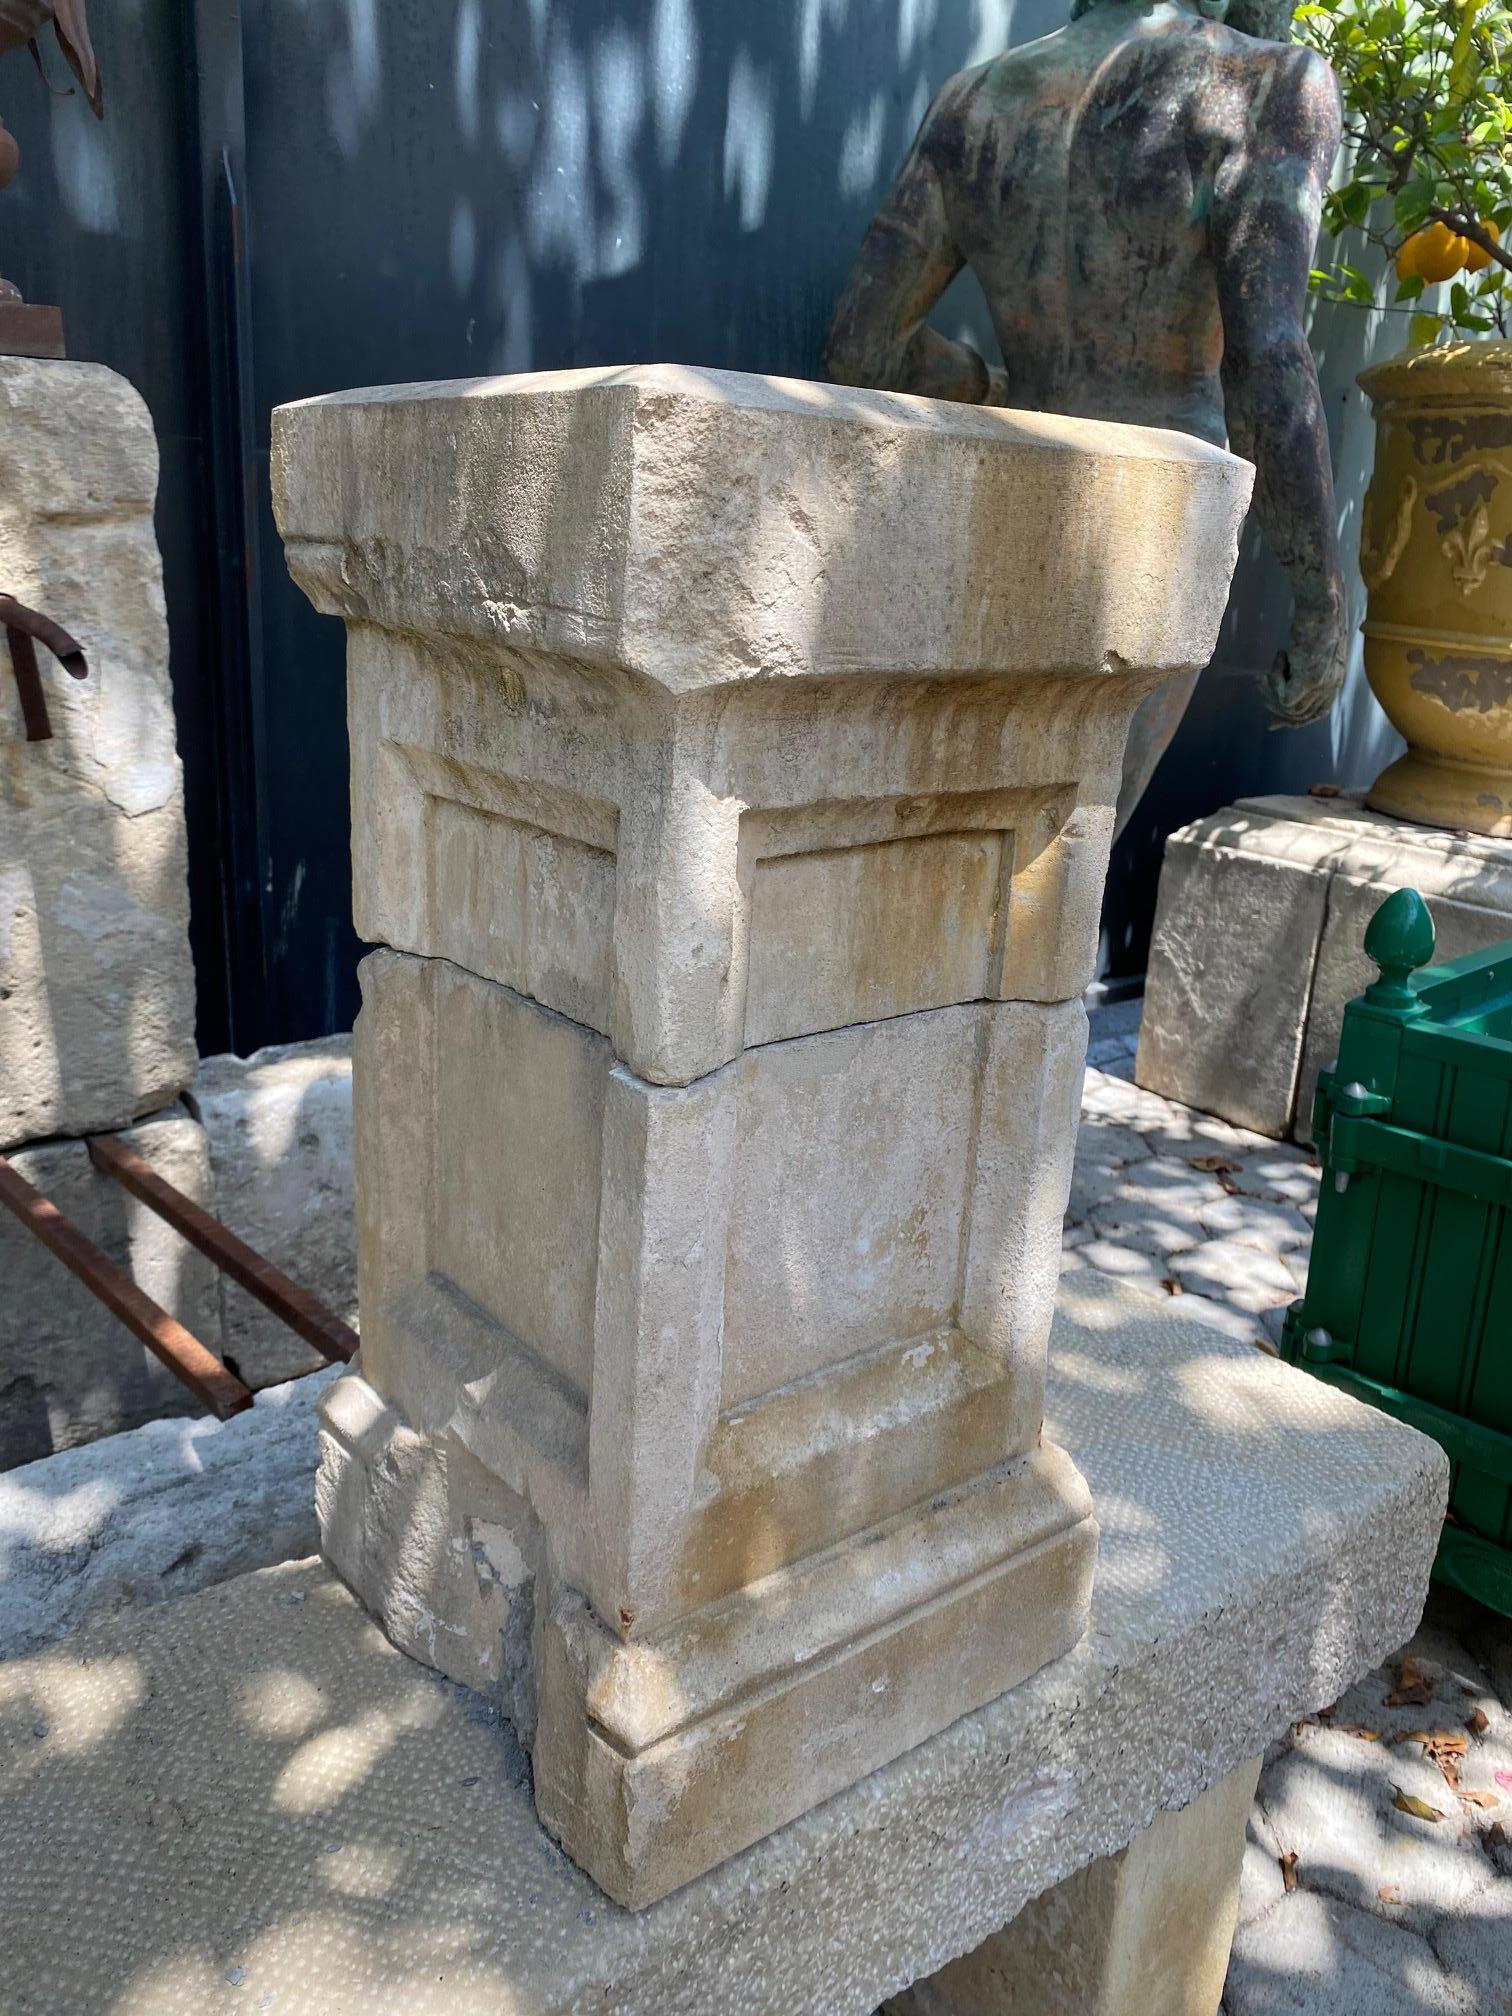 Nicely hand carved two blocks 19th century stone column base square small pedestal. Could be used as in a garden as an architectural decorative element, focal point or to top it with a finial or mount a lantern or jardinière urn vase or sculpture